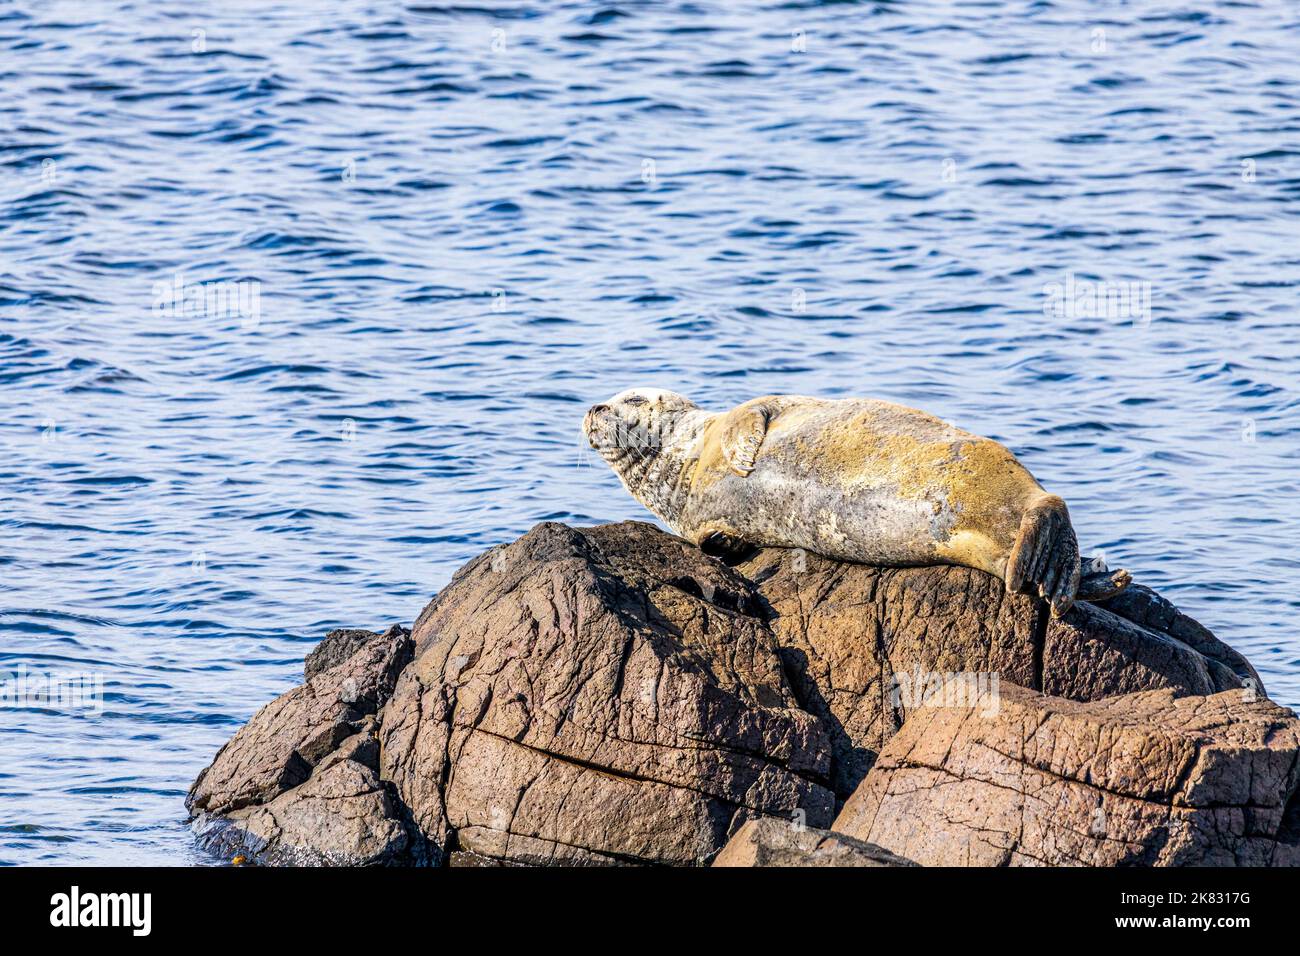 A seal hauled out on a rock at Machrihanish on the Kintyre Peninsula, Argyll & Bute, Scotland UK Stock Photo